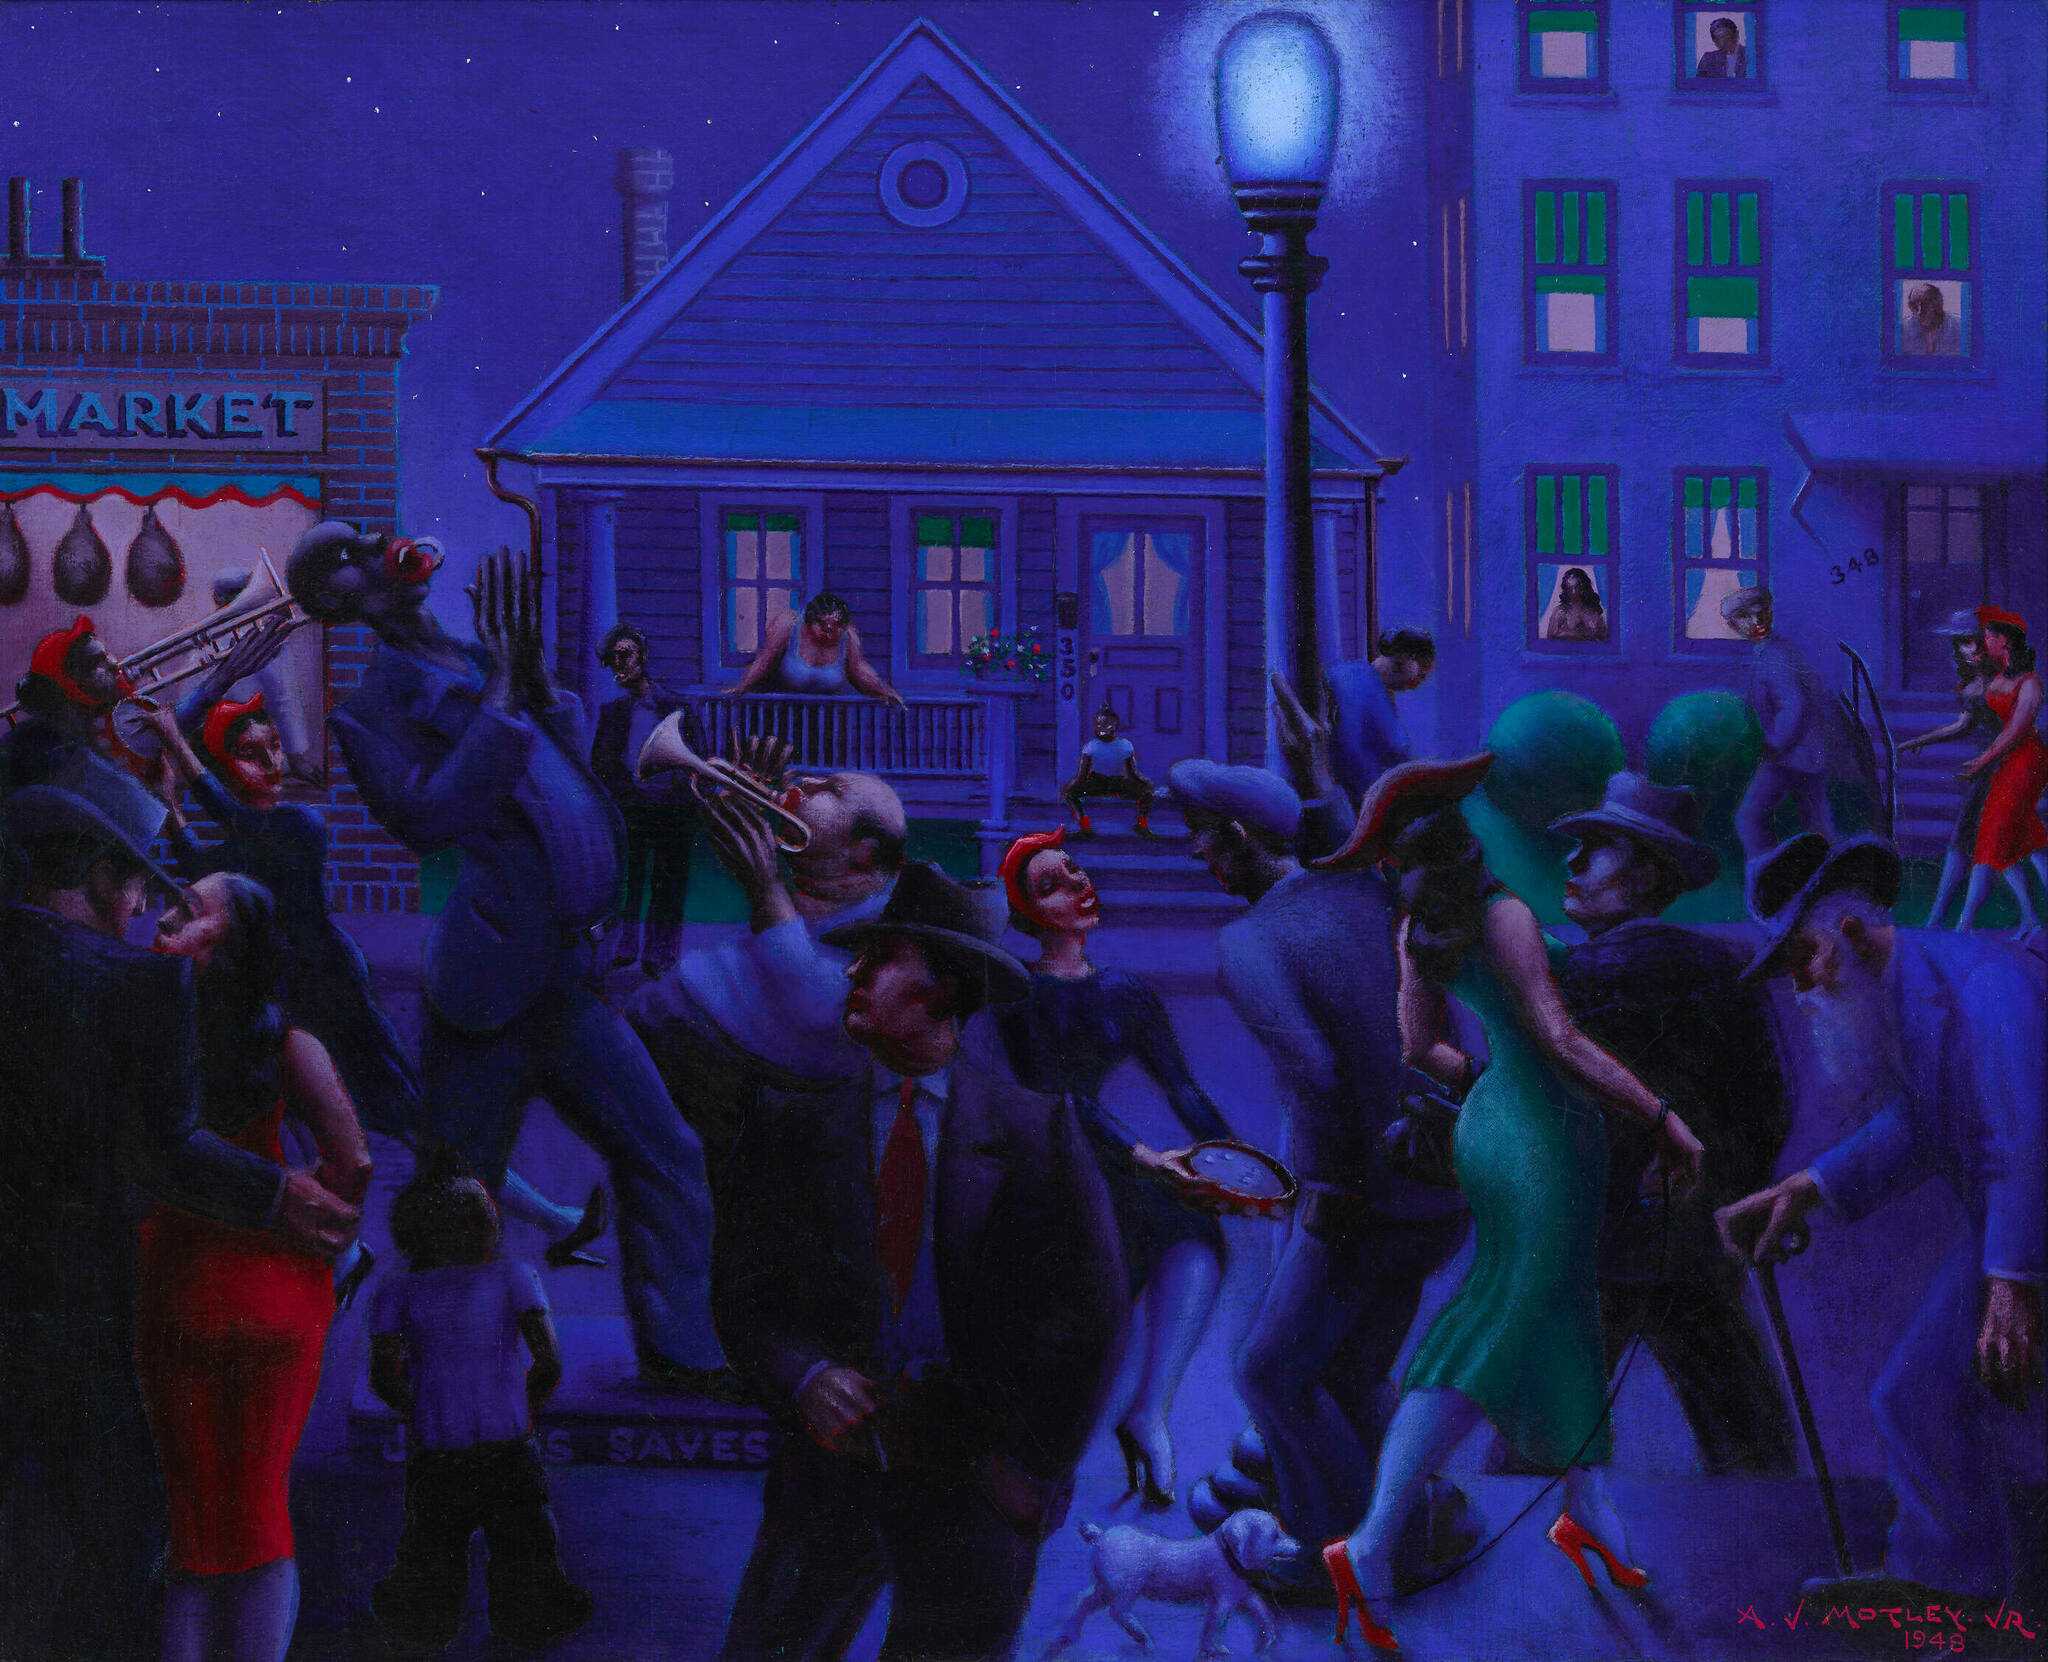 Find out more about Archibald John Motley, Jr. - Gettin' Religion